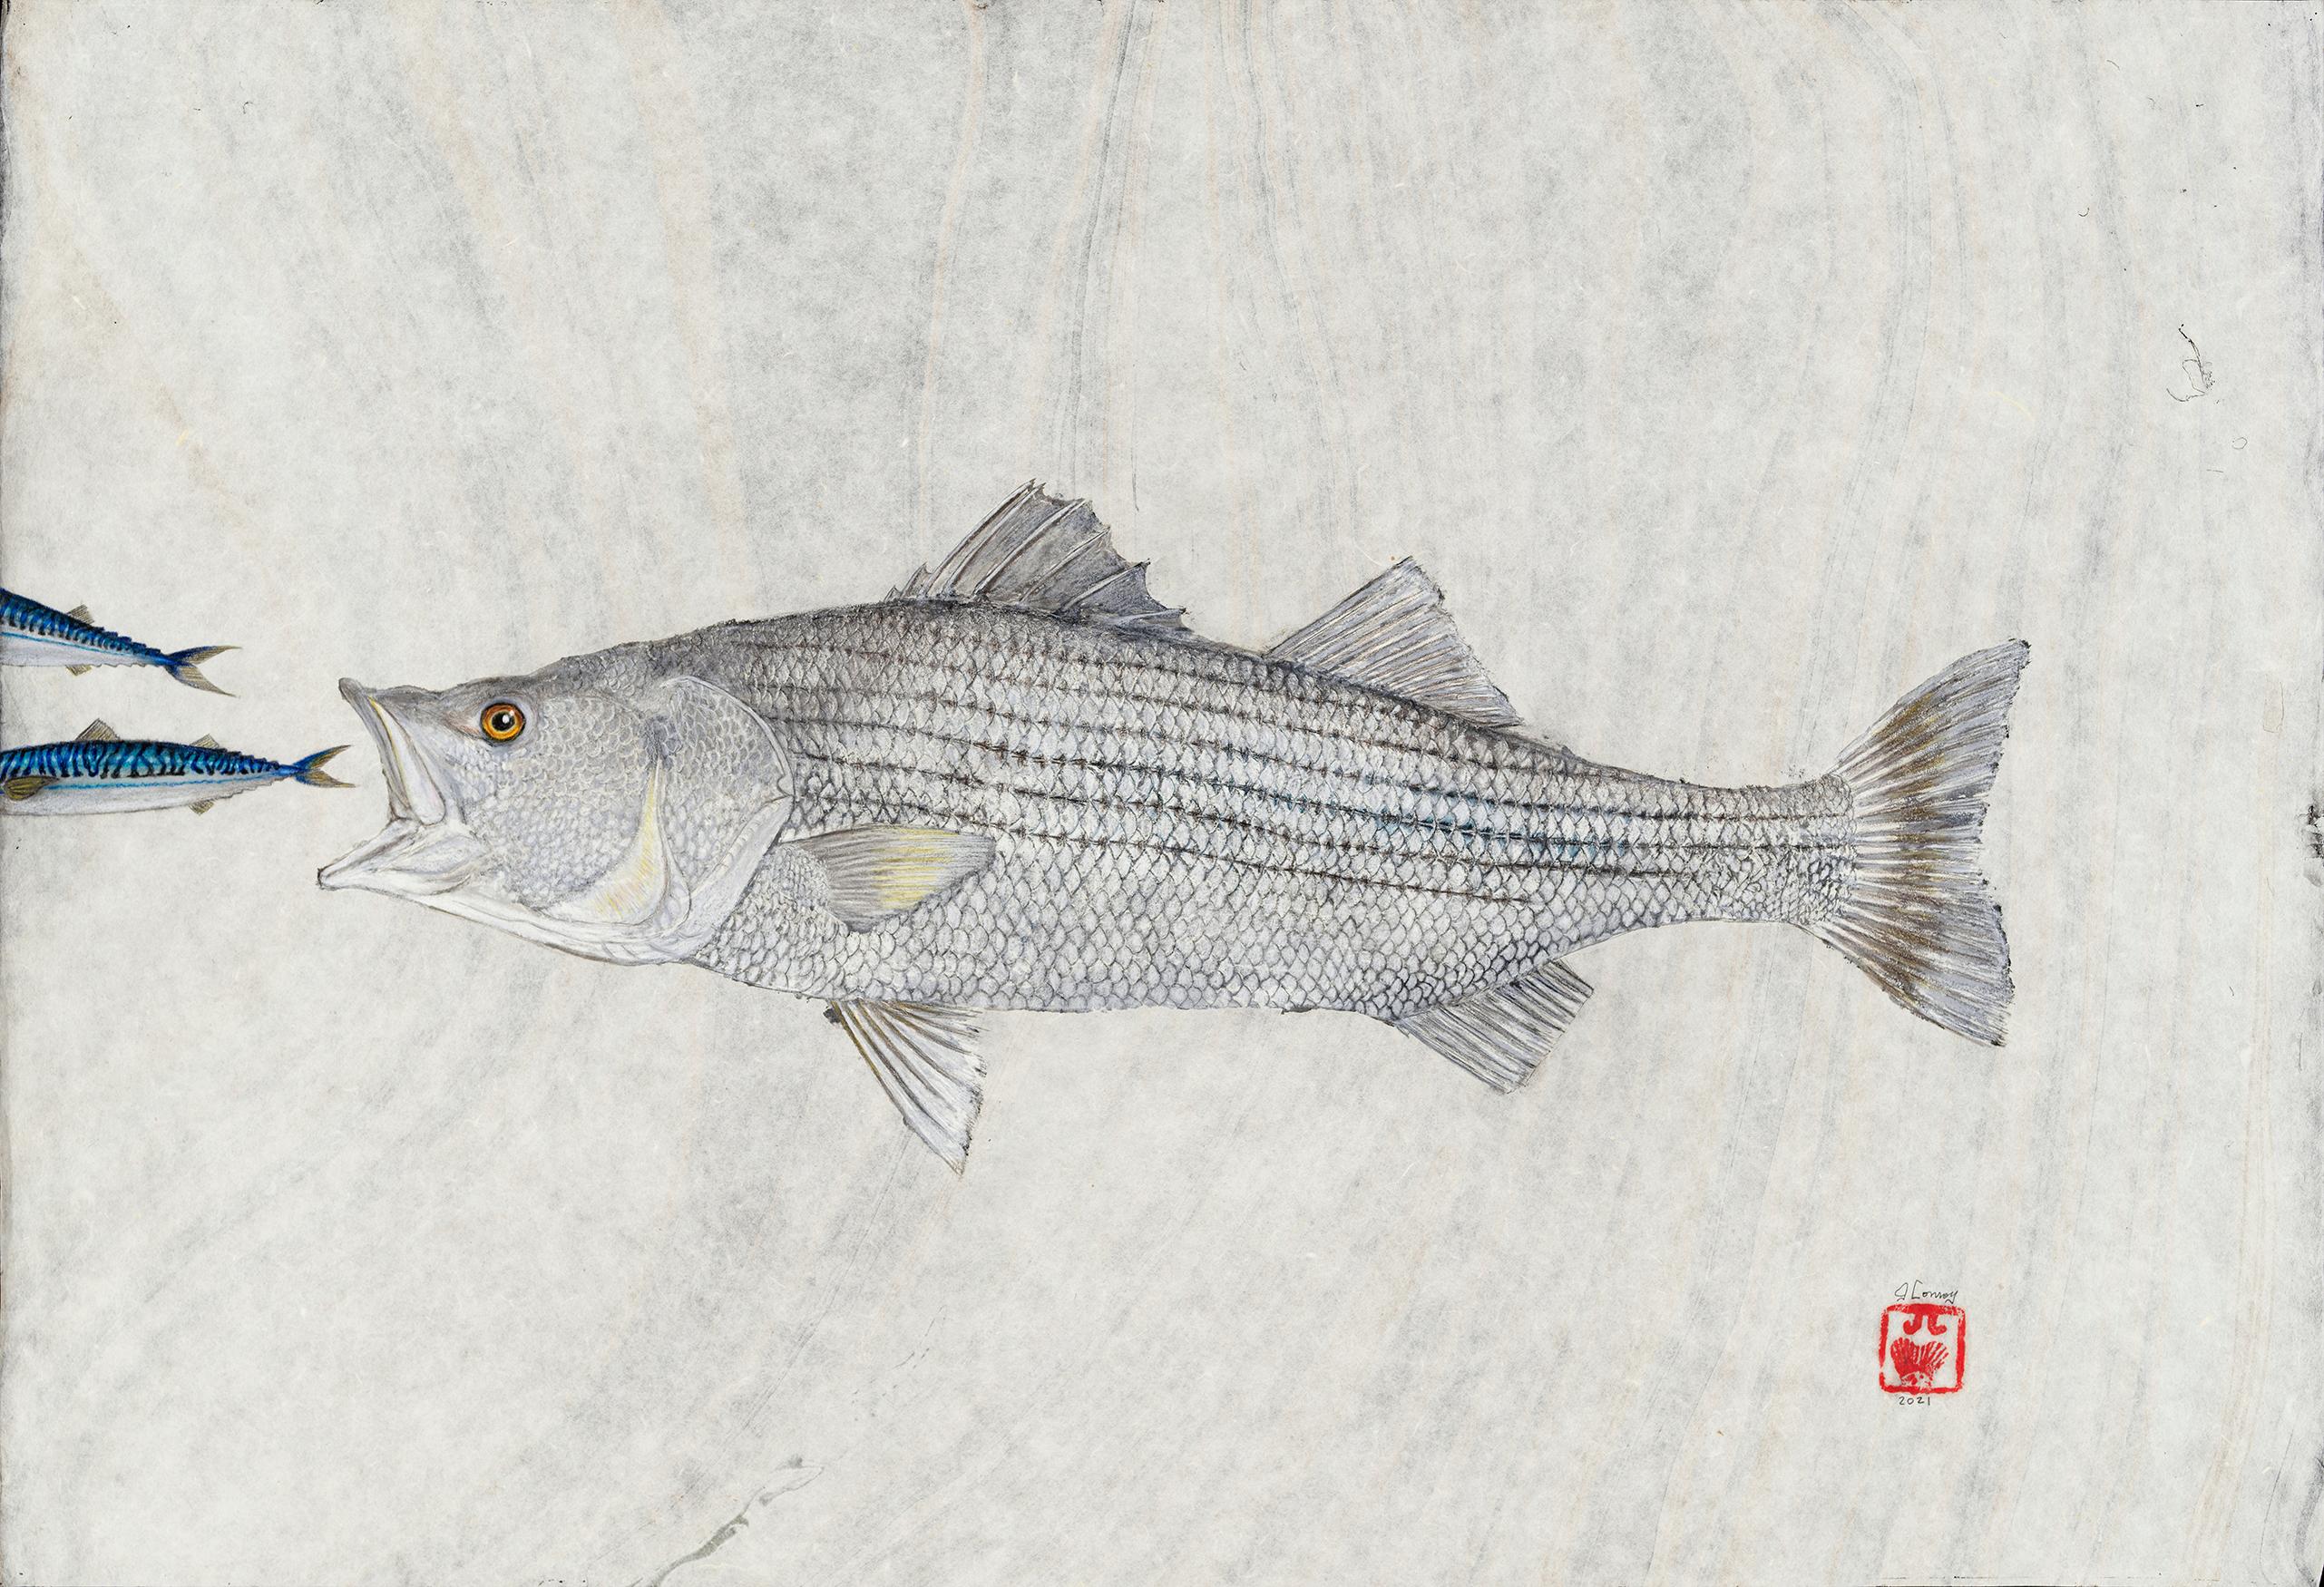 Big Mack Attack - Striped Bass Eating a Mackerel, Watercolor on Mulberry Paper 